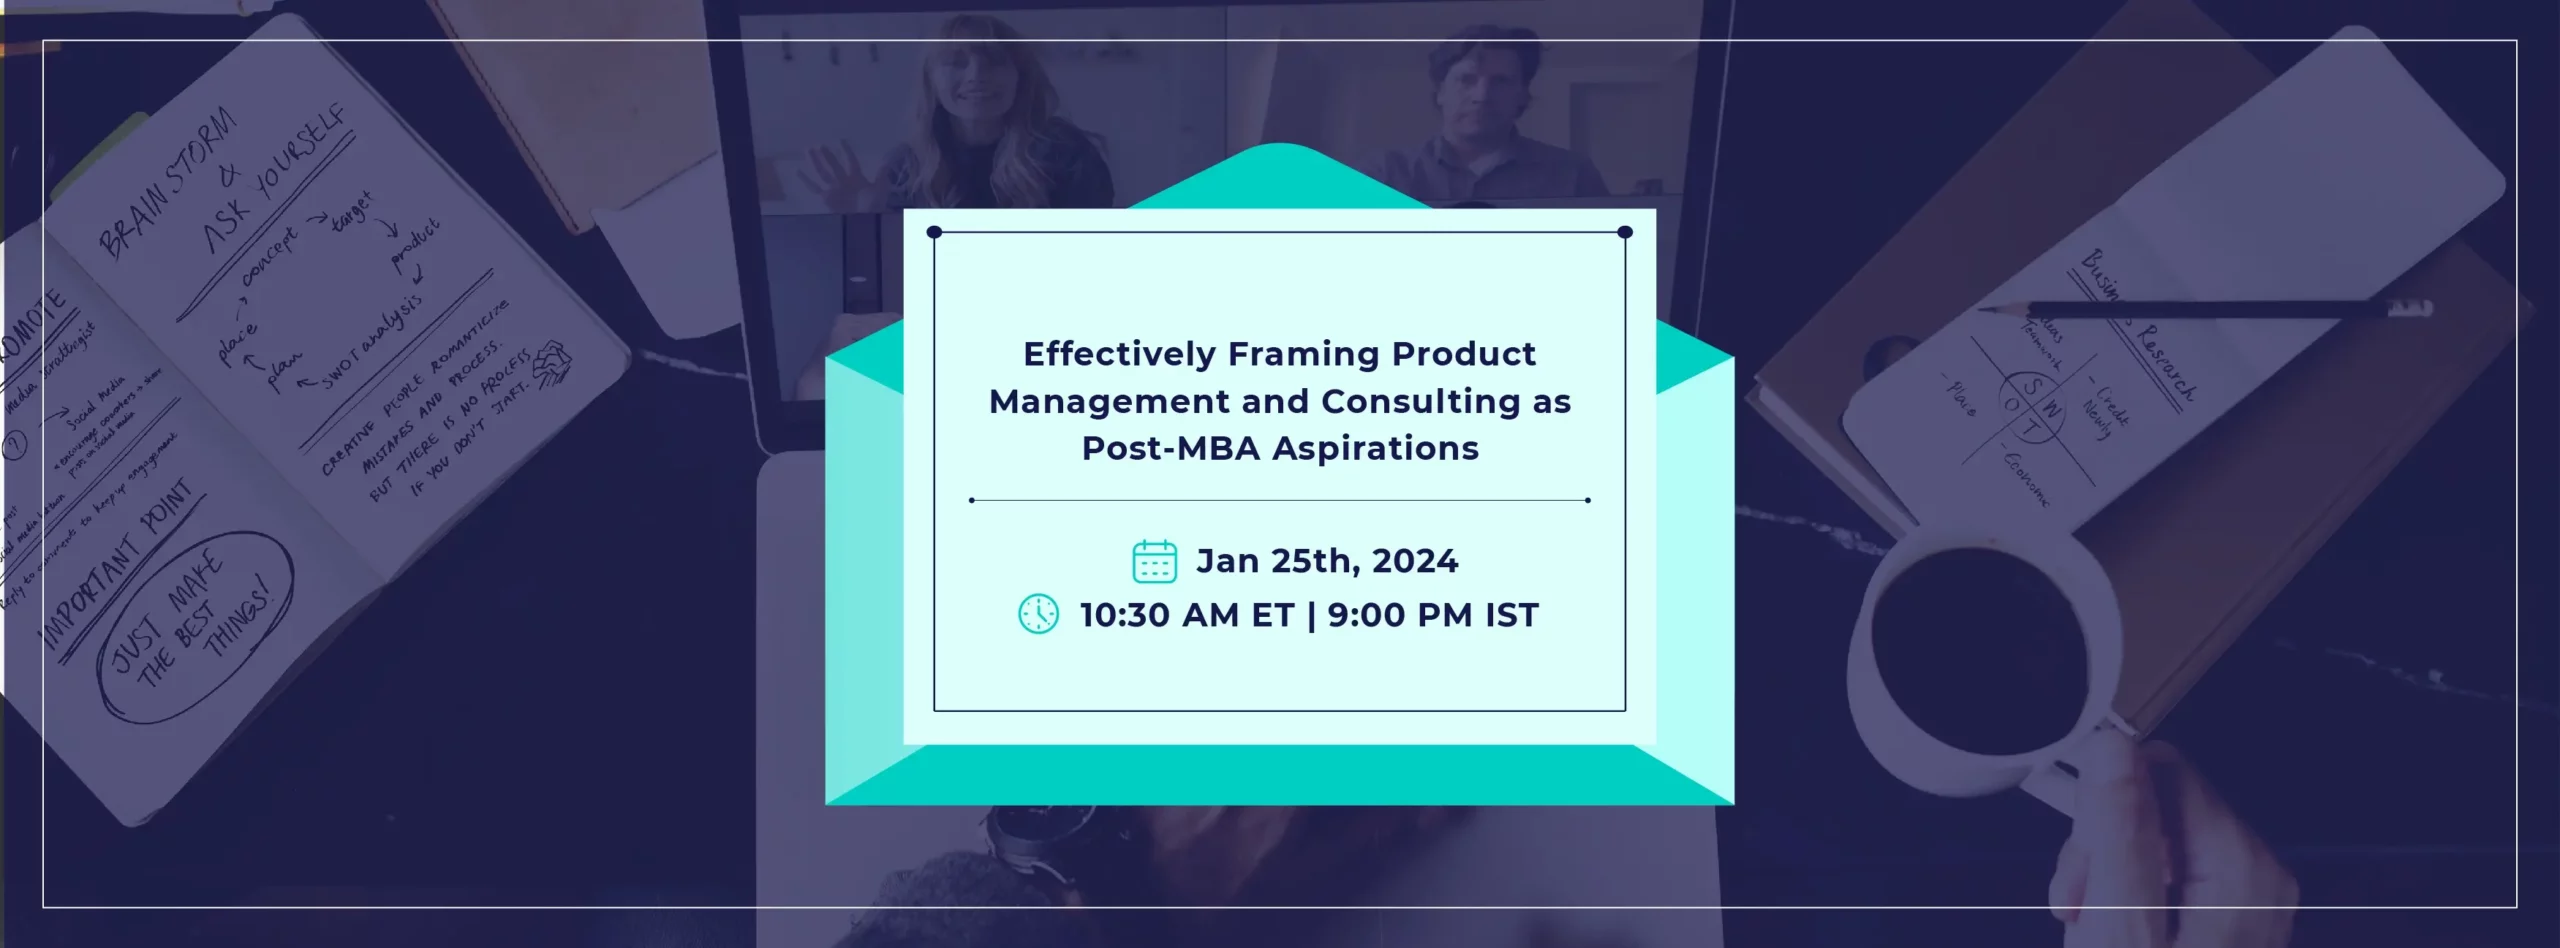 Effectively Framing Product Management and Consulting as Post-MBA Goals!